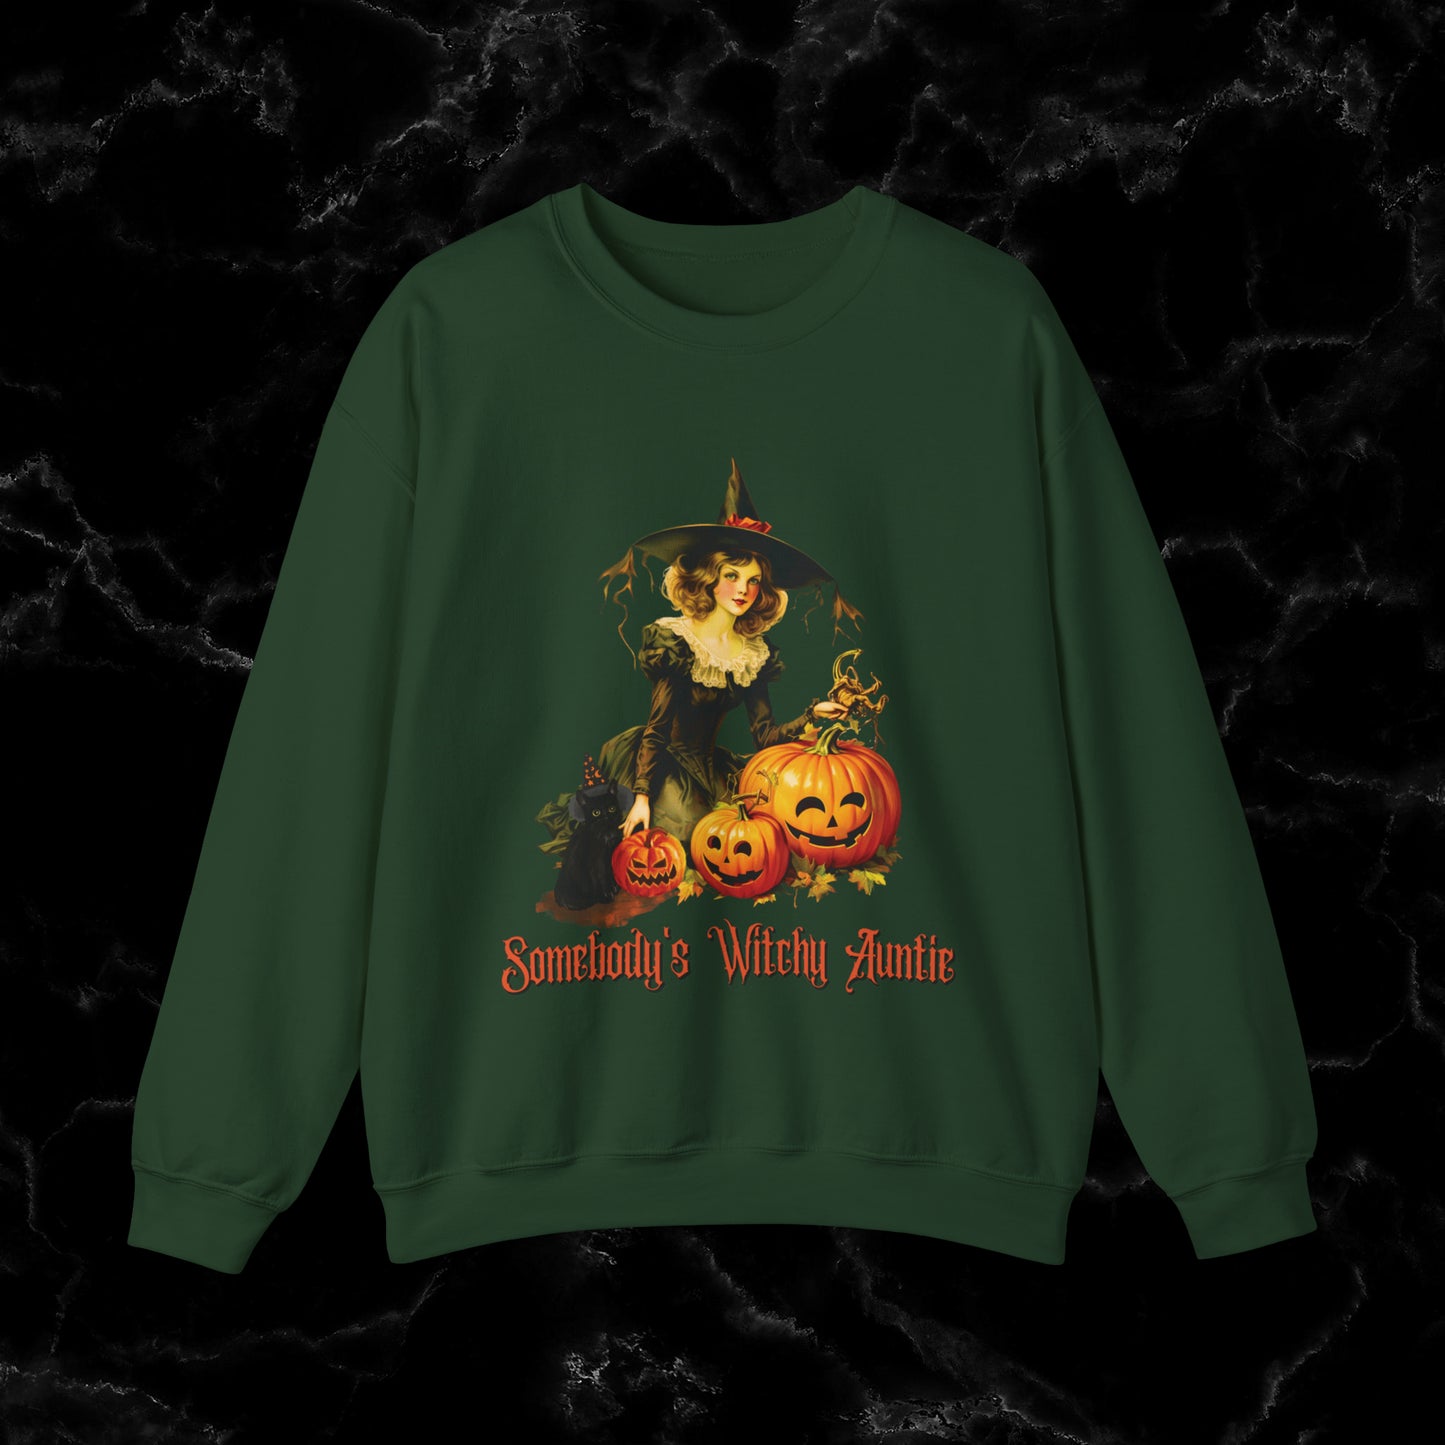 Witchy Auntie Sweatshirt - Cool Aunt Shirt for Halloweenl Vibes Sweatshirt S Forest Green 